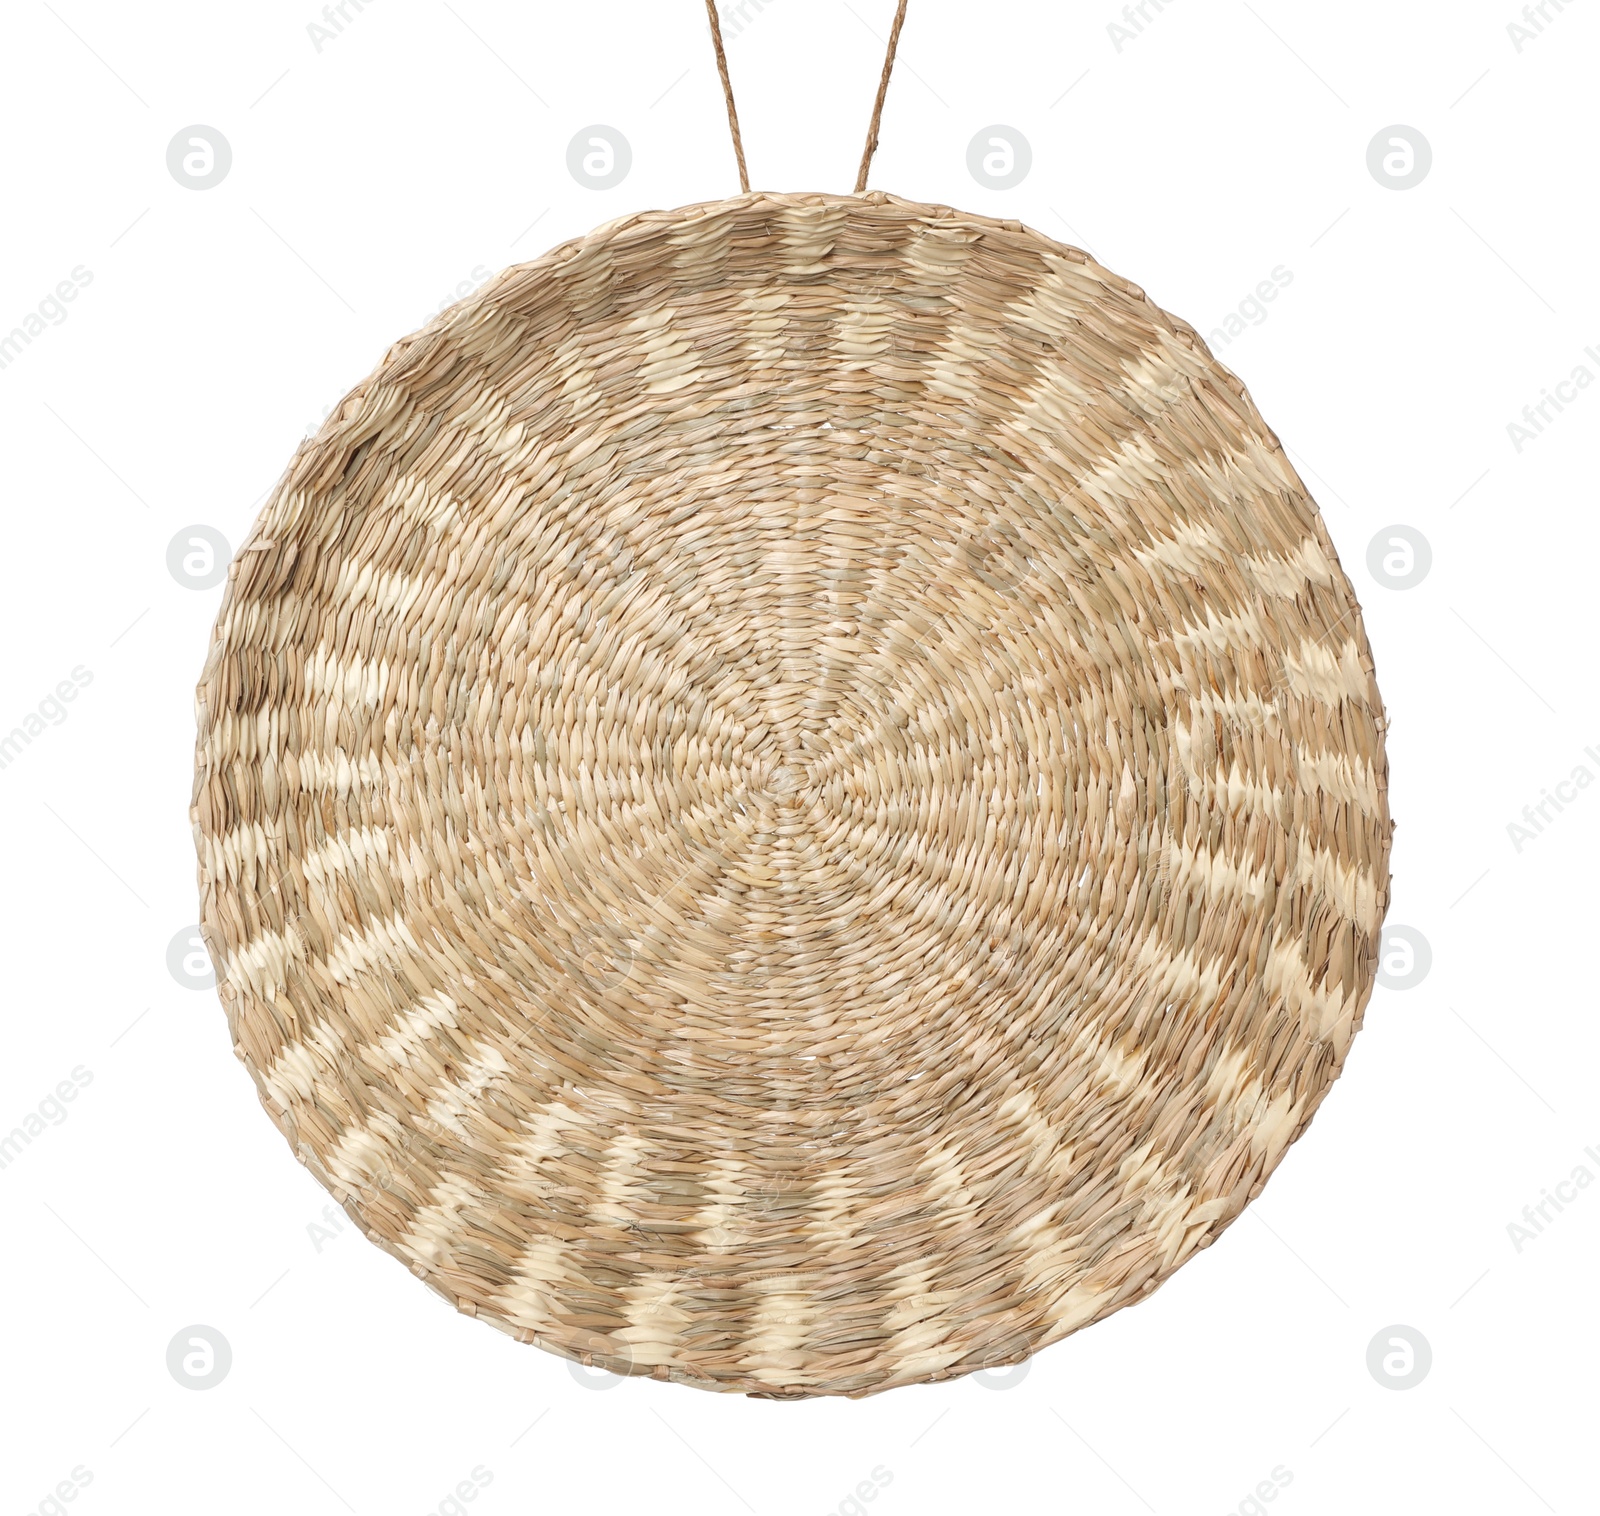 Photo of Wicker wall decor element isolated on white